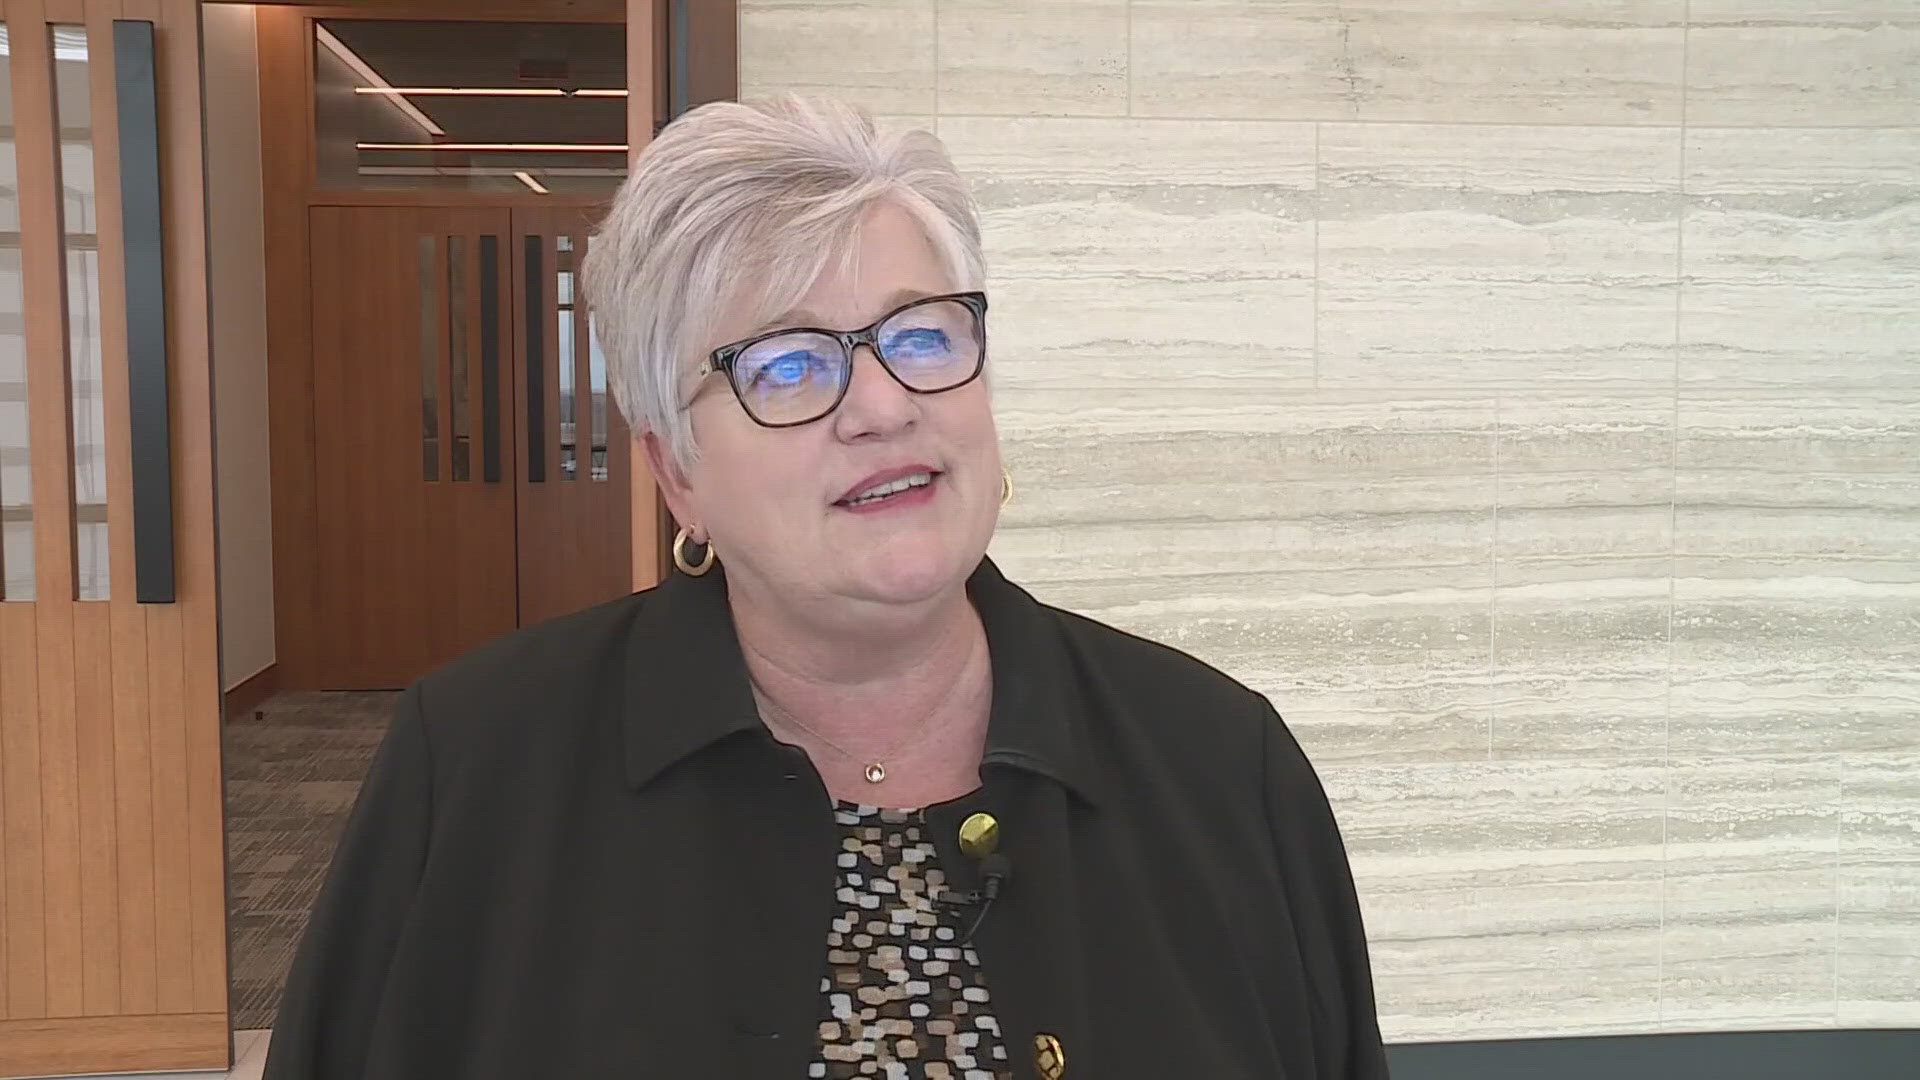 Dr. Susan Kincannon has been superintendent of Waco ISD since 2019, and plans to officially retire at the end of September.